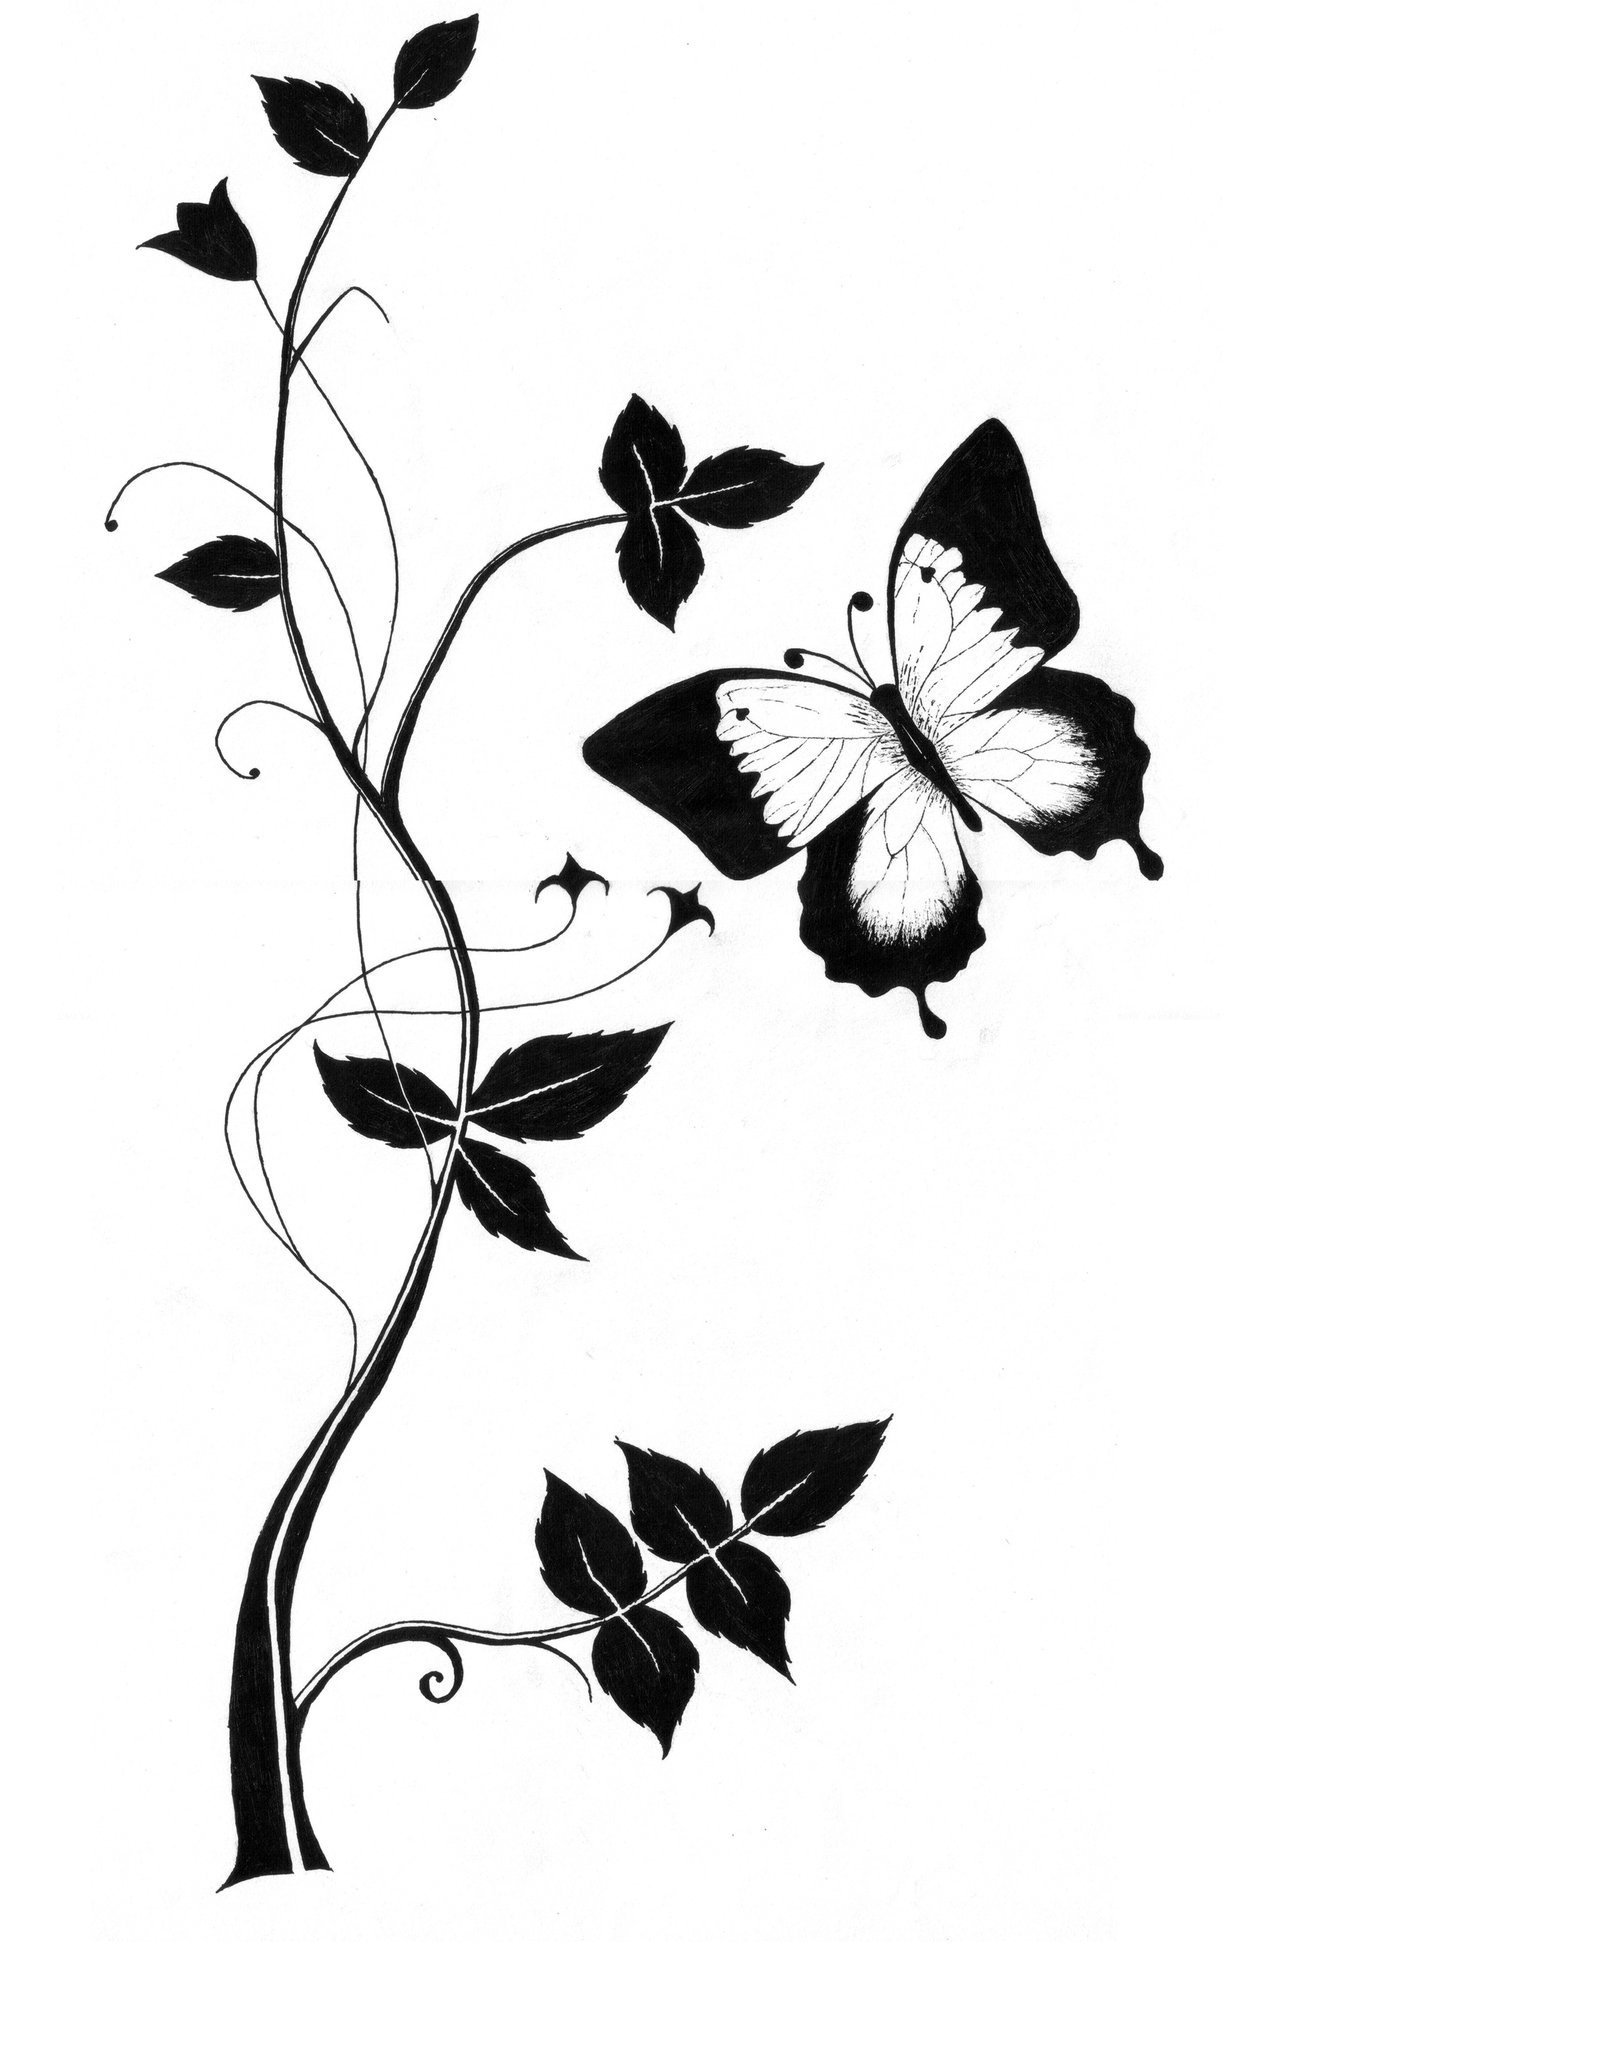 Free Butterfly Drawings Download Free Clip Art Free Clip Art On Clipart Library I chose the hardest flower out of all of the choices to draw and i thought it actually came out great. clipart library